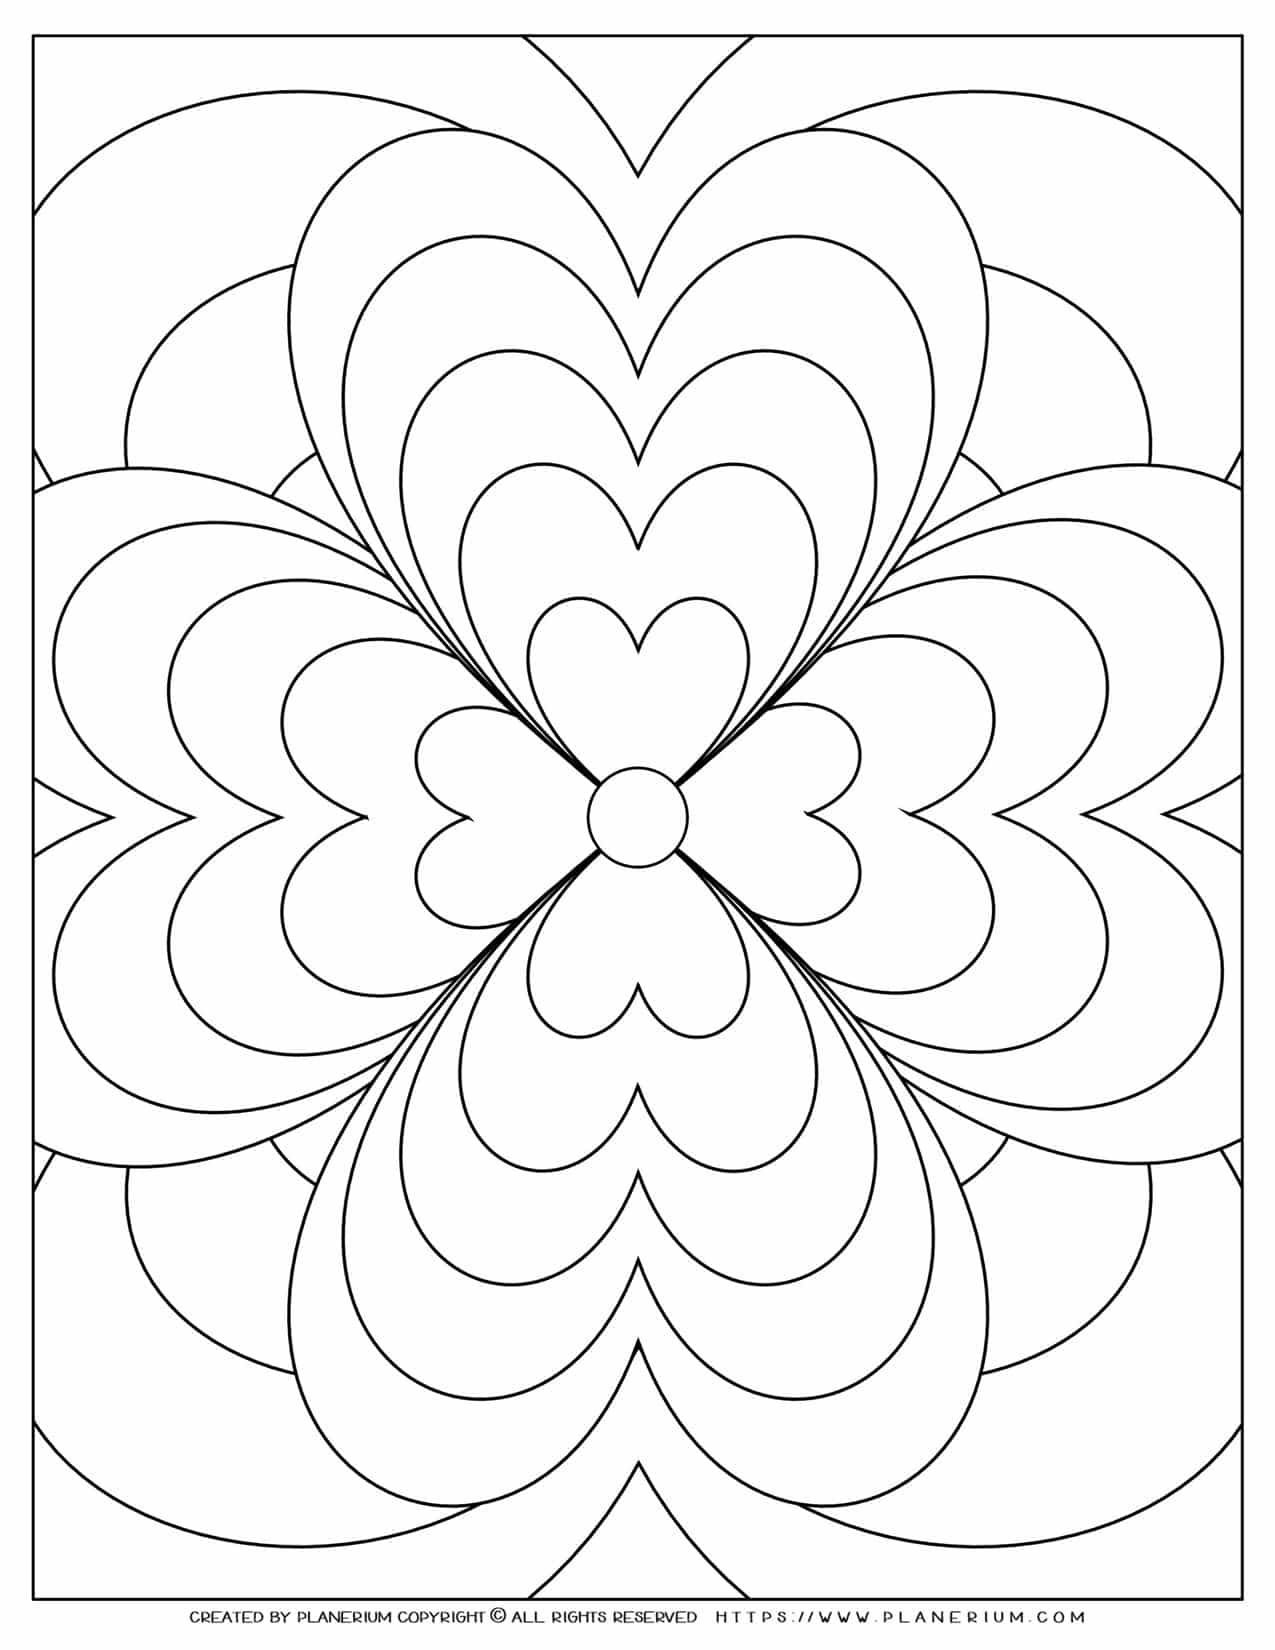 Adult Coloring Pages with Geometric Flowers Hearts | Planerium